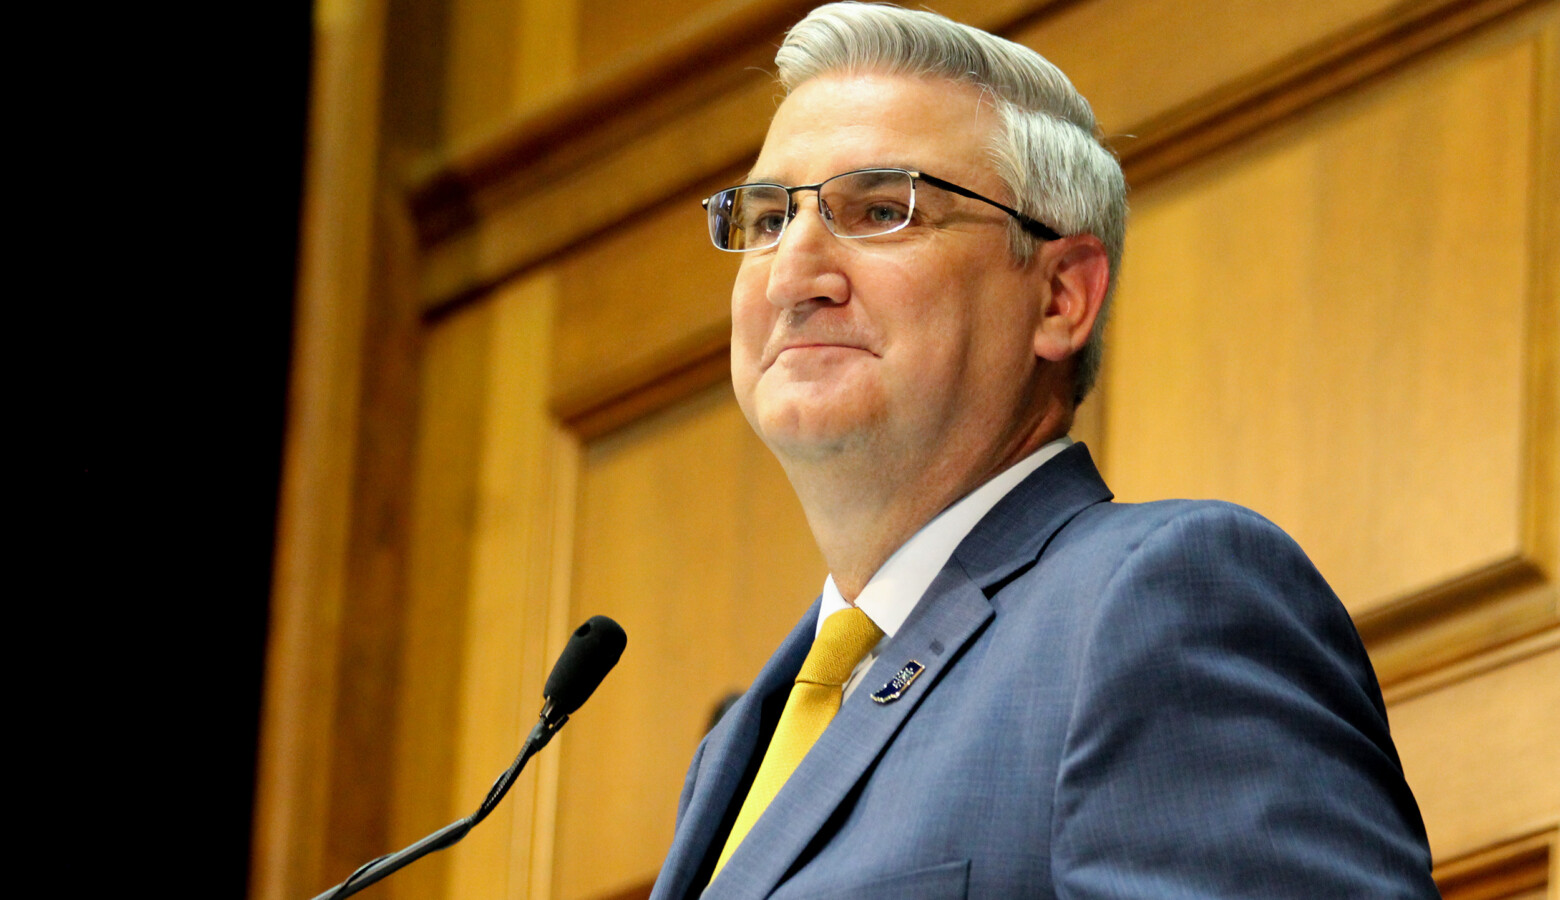 Gov. Eric Holcomb said Indiana won’t participate in the payroll tax deferral for state workers offered by President Trump last month. (Lauren Chapman/IPB News)